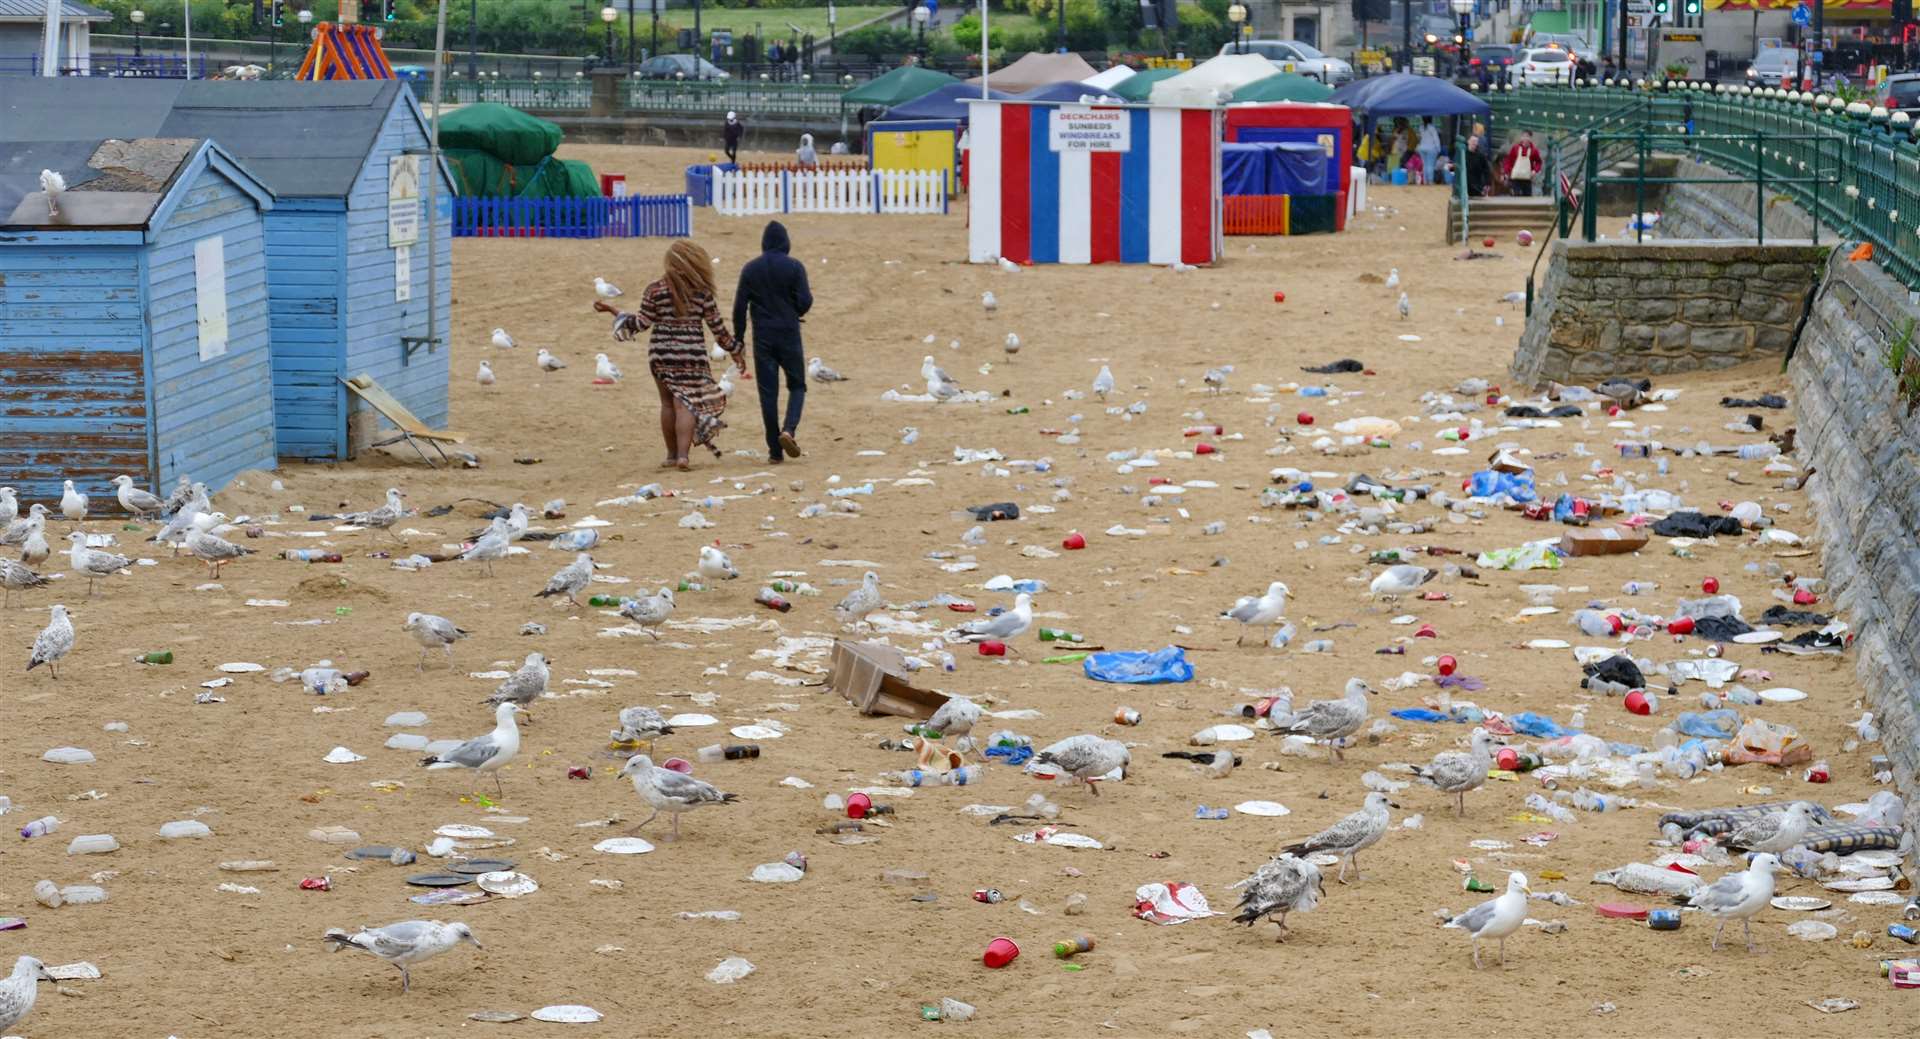 The state of Margate beach has been described as "shocking and heartbreaking" after litter was left behind on Saturday. Picture: Frank Leppard (14463446)